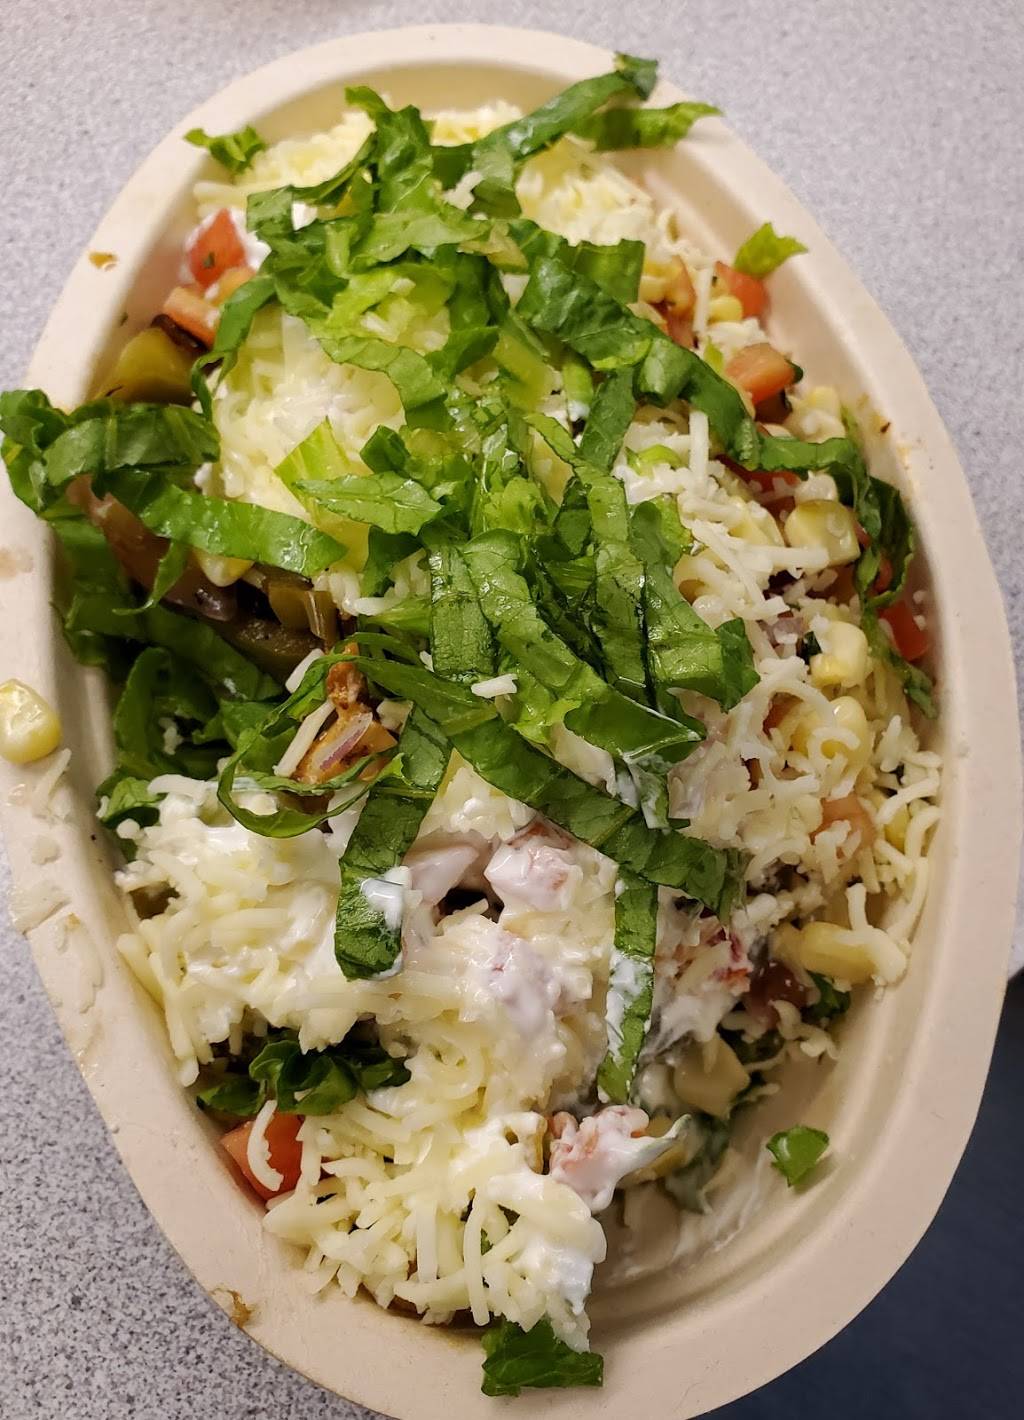 Chipotle Mexican Grill | 11452 Euclid Ave, Cleveland, OH 44106 | Phone: (216) 472-2297